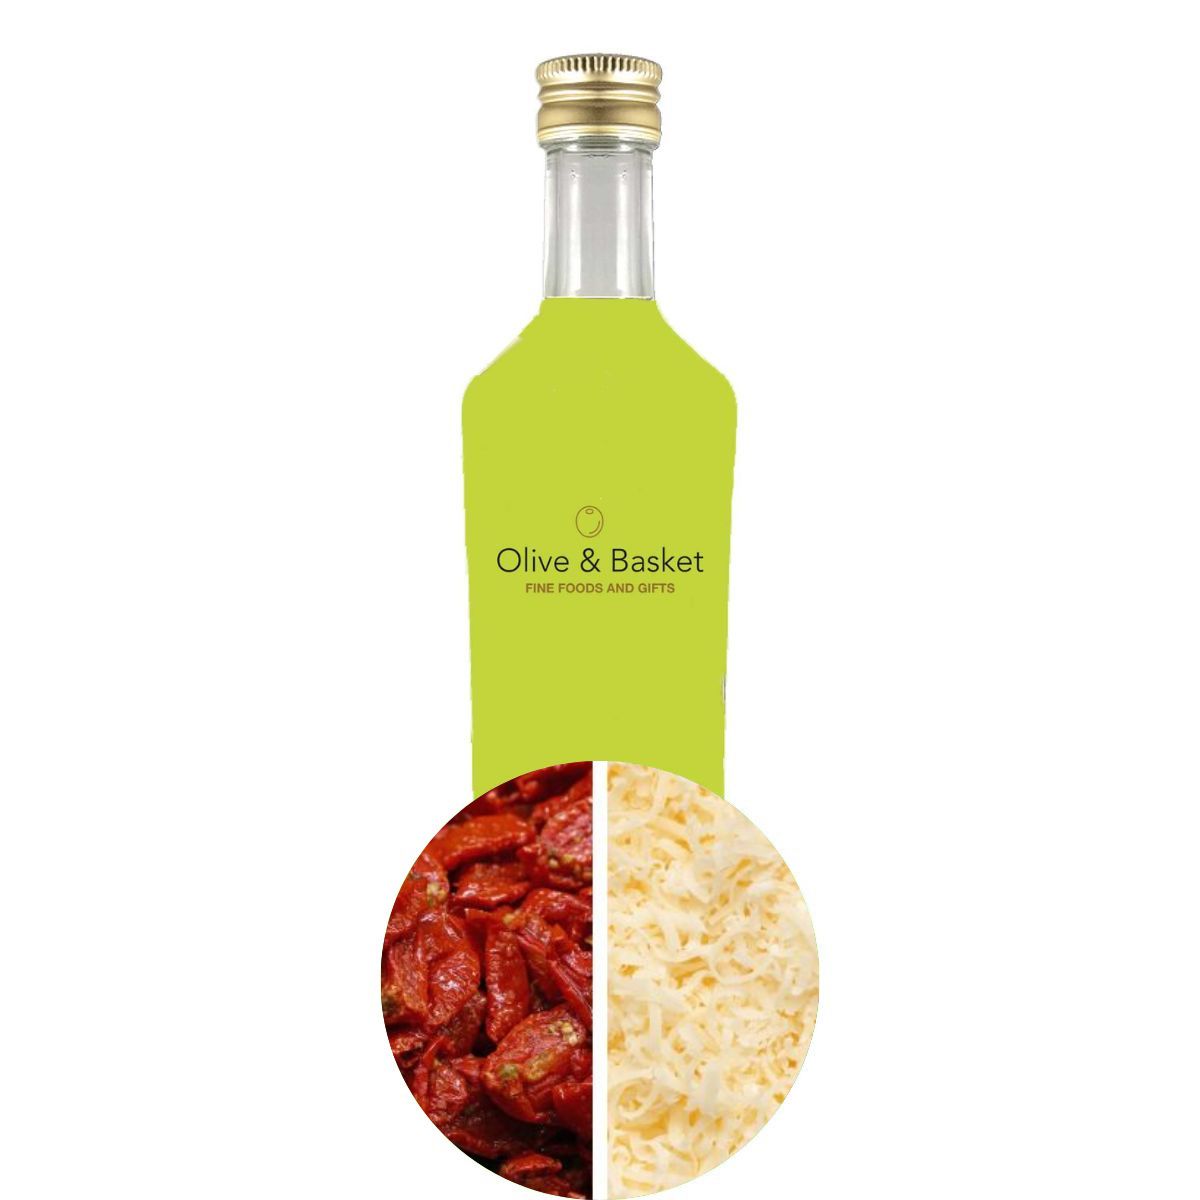 Sundried Tomato Parmesan Olive Oil- Great for bread dipping or pasta